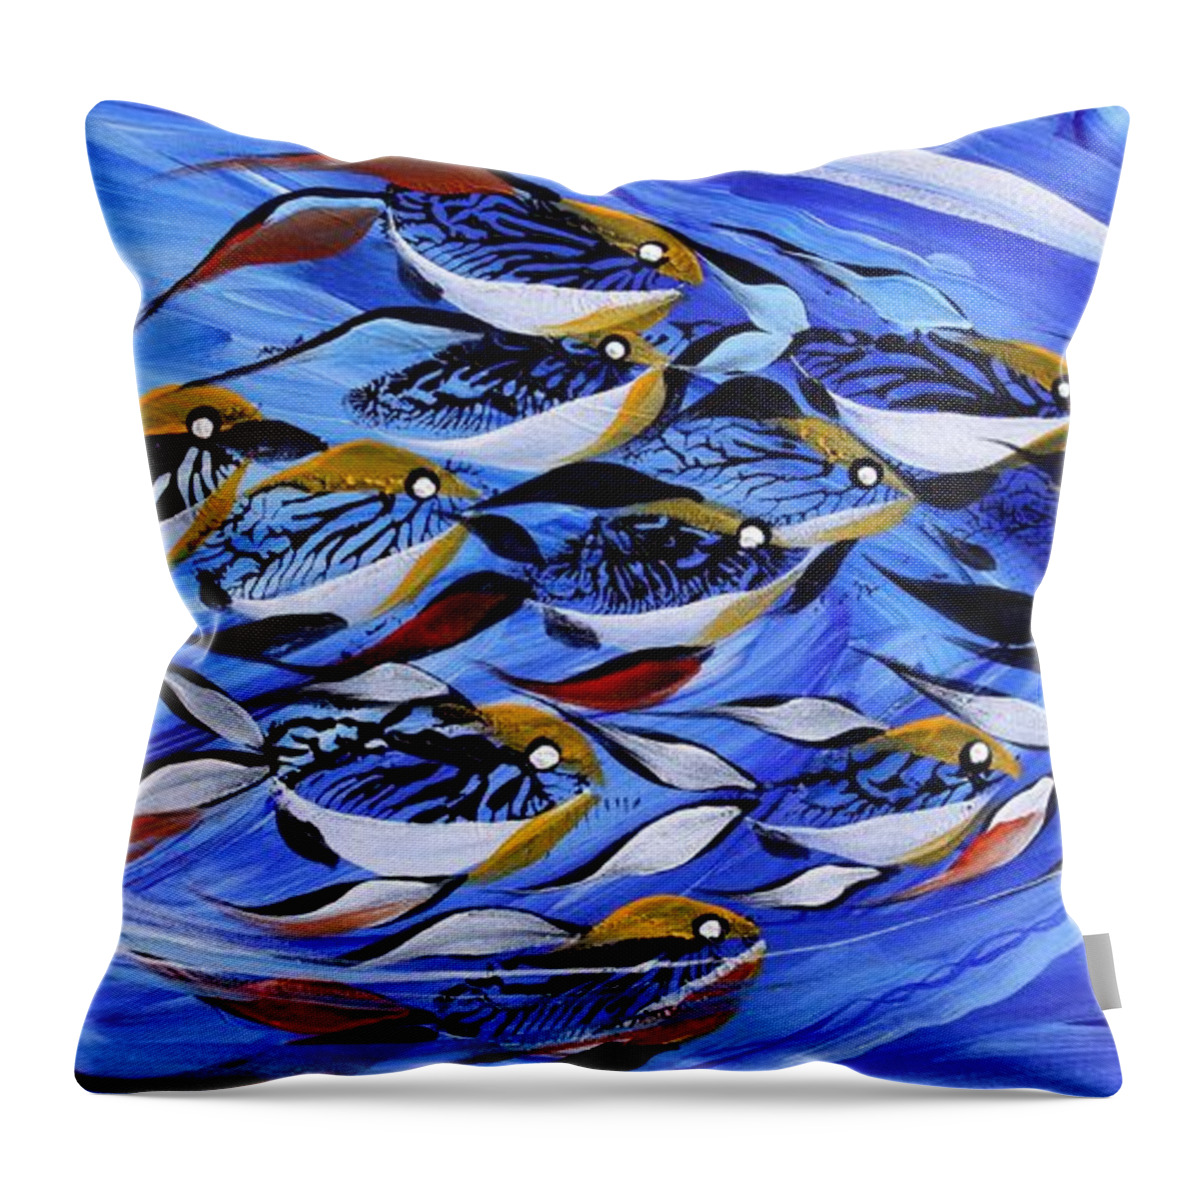 Fish Throw Pillow featuring the painting Keep it Together by J Vincent Scarpace